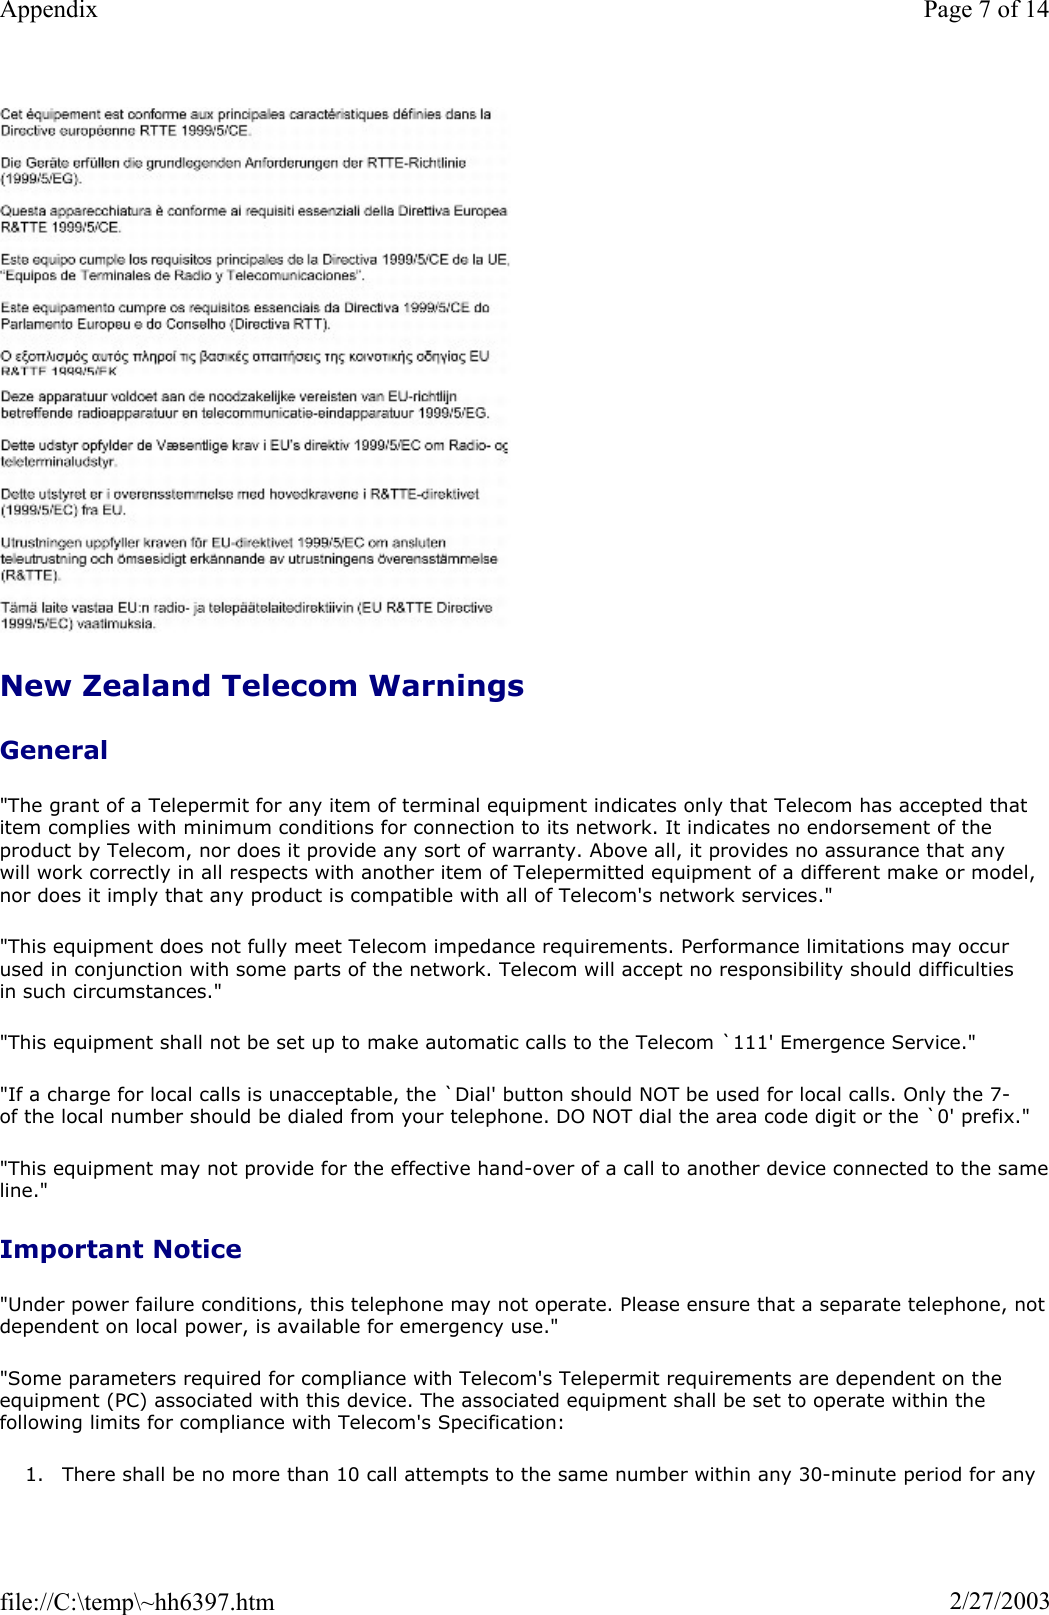 New Zealand Telecom Warnings General&quot;The grant of a Telepermit for any item of terminal equipment indicates only that Telecom has accepted that item complies with minimum conditions for connection to its network. It indicates no endorsement of the product by Telecom, nor does it provide any sort of warranty. Above all, it provides no assurance that any will work correctly in all respects with another item of Telepermitted equipment of a different make or model, nor does it imply that any product is compatible with all of Telecom&apos;s network services.&quot; &quot;This equipment does not fully meet Telecom impedance requirements. Performance limitations may occur used in conjunction with some parts of the network. Telecom will accept no responsibility should difficulties in such circumstances.&quot; &quot;This equipment shall not be set up to make automatic calls to the Telecom `111&apos; Emergence Service.&quot; &quot;If a charge for local calls is unacceptable, the `Dial&apos; button should NOT be used for local calls. Only the 7-of the local number should be dialed from your telephone. DO NOT dial the area code digit or the `0&apos; prefix.&quot; &quot;This equipment may not provide for the effective hand-over of a call to another device connected to the sameline.&quot;Important Notice &quot;Under power failure conditions, this telephone may not operate. Please ensure that a separate telephone, not dependent on local power, is available for emergency use.&quot; &quot;Some parameters required for compliance with Telecom&apos;s Telepermit requirements are dependent on the equipment (PC) associated with this device. The associated equipment shall be set to operate within the following limits for compliance with Telecom&apos;s Specification: 1. There shall be no more than 10 call attempts to the same number within any 30-minute period for any Page 7 of 14Appendix2/27/2003file://C:\temp\~hh6397.htm